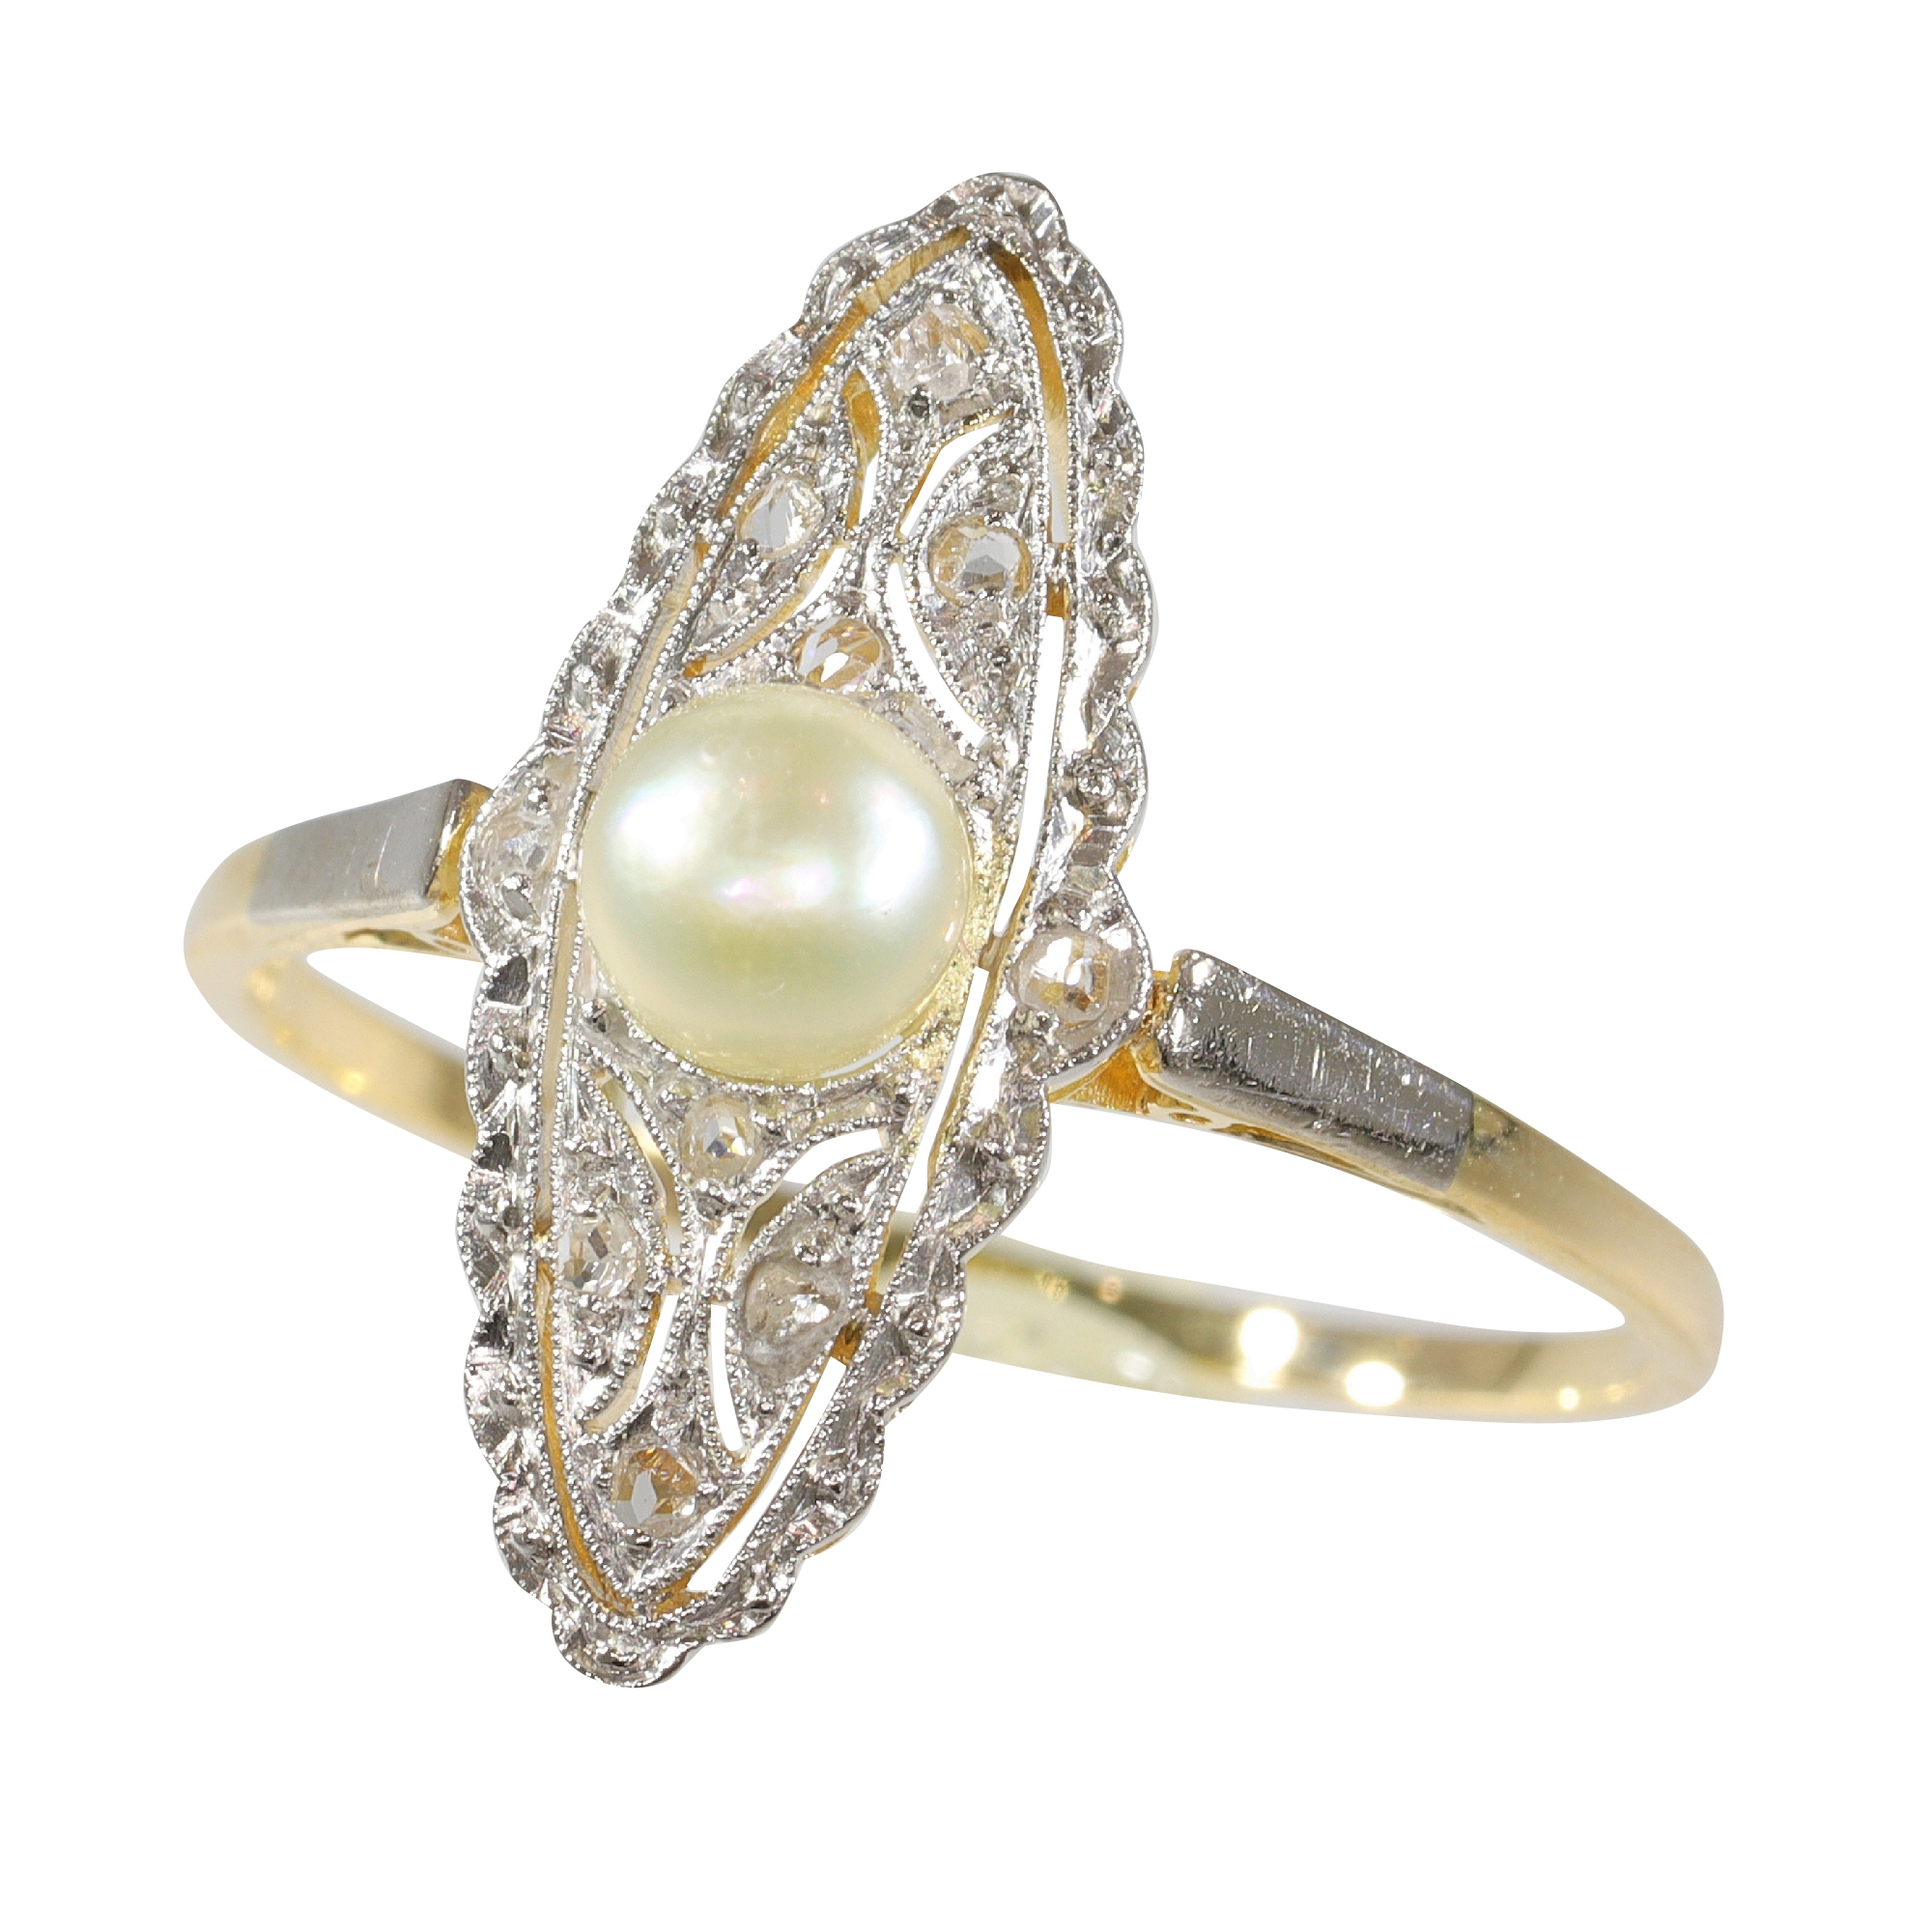 Deco Meets Edwardian: Vintage 1920's Pearl and Diamond Ring